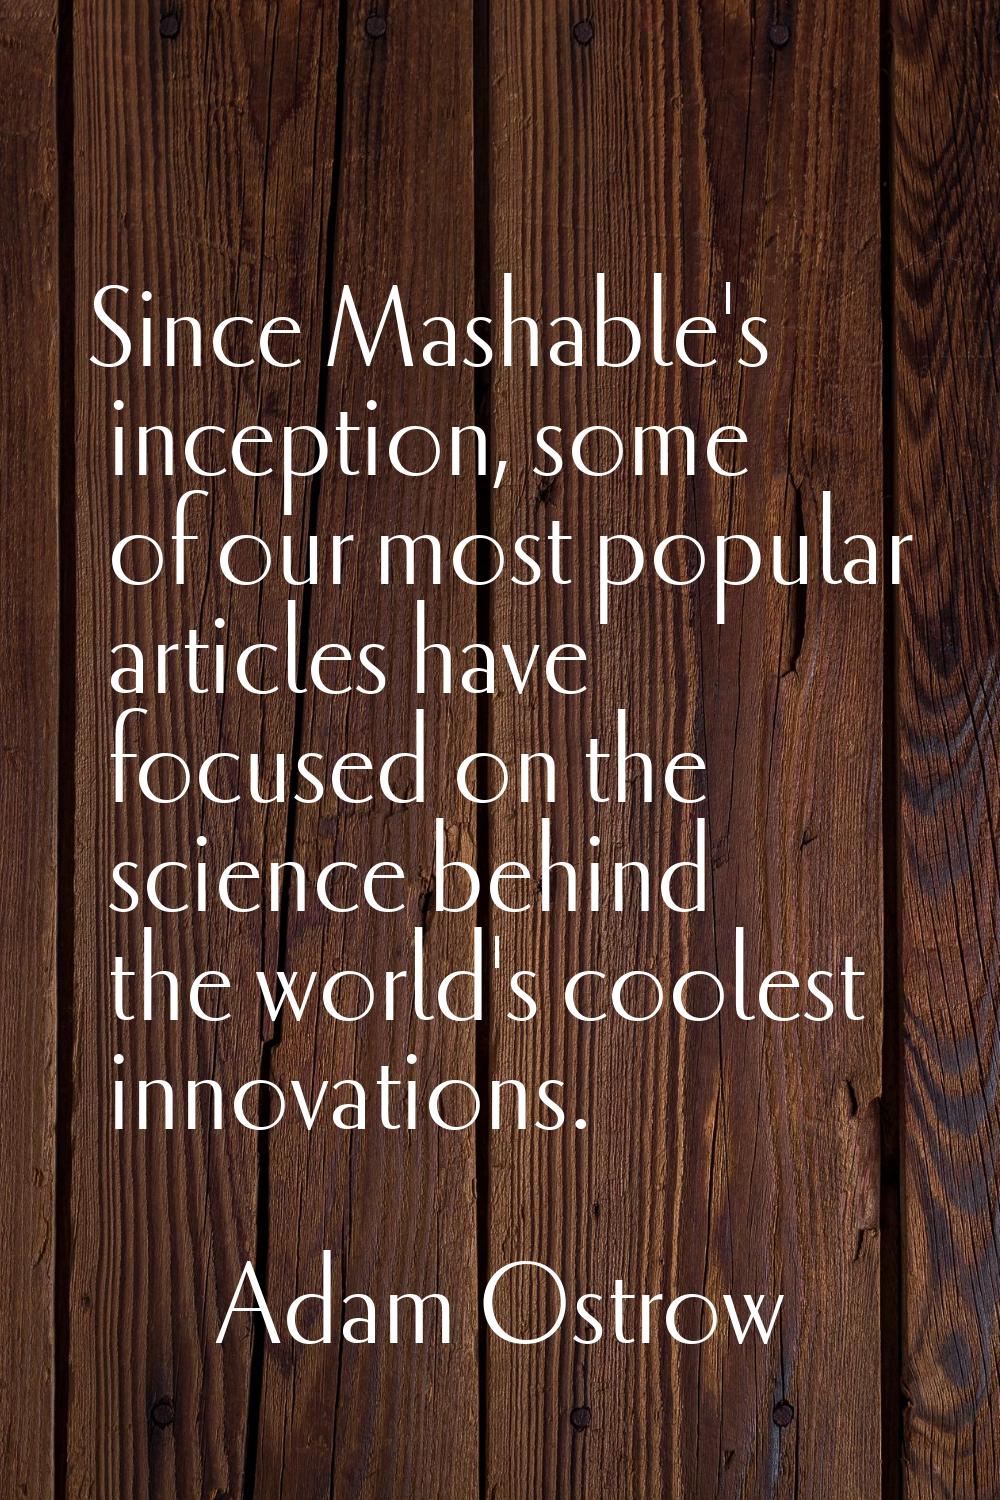 Since Mashable's inception, some of our most popular articles have focused on the science behind th